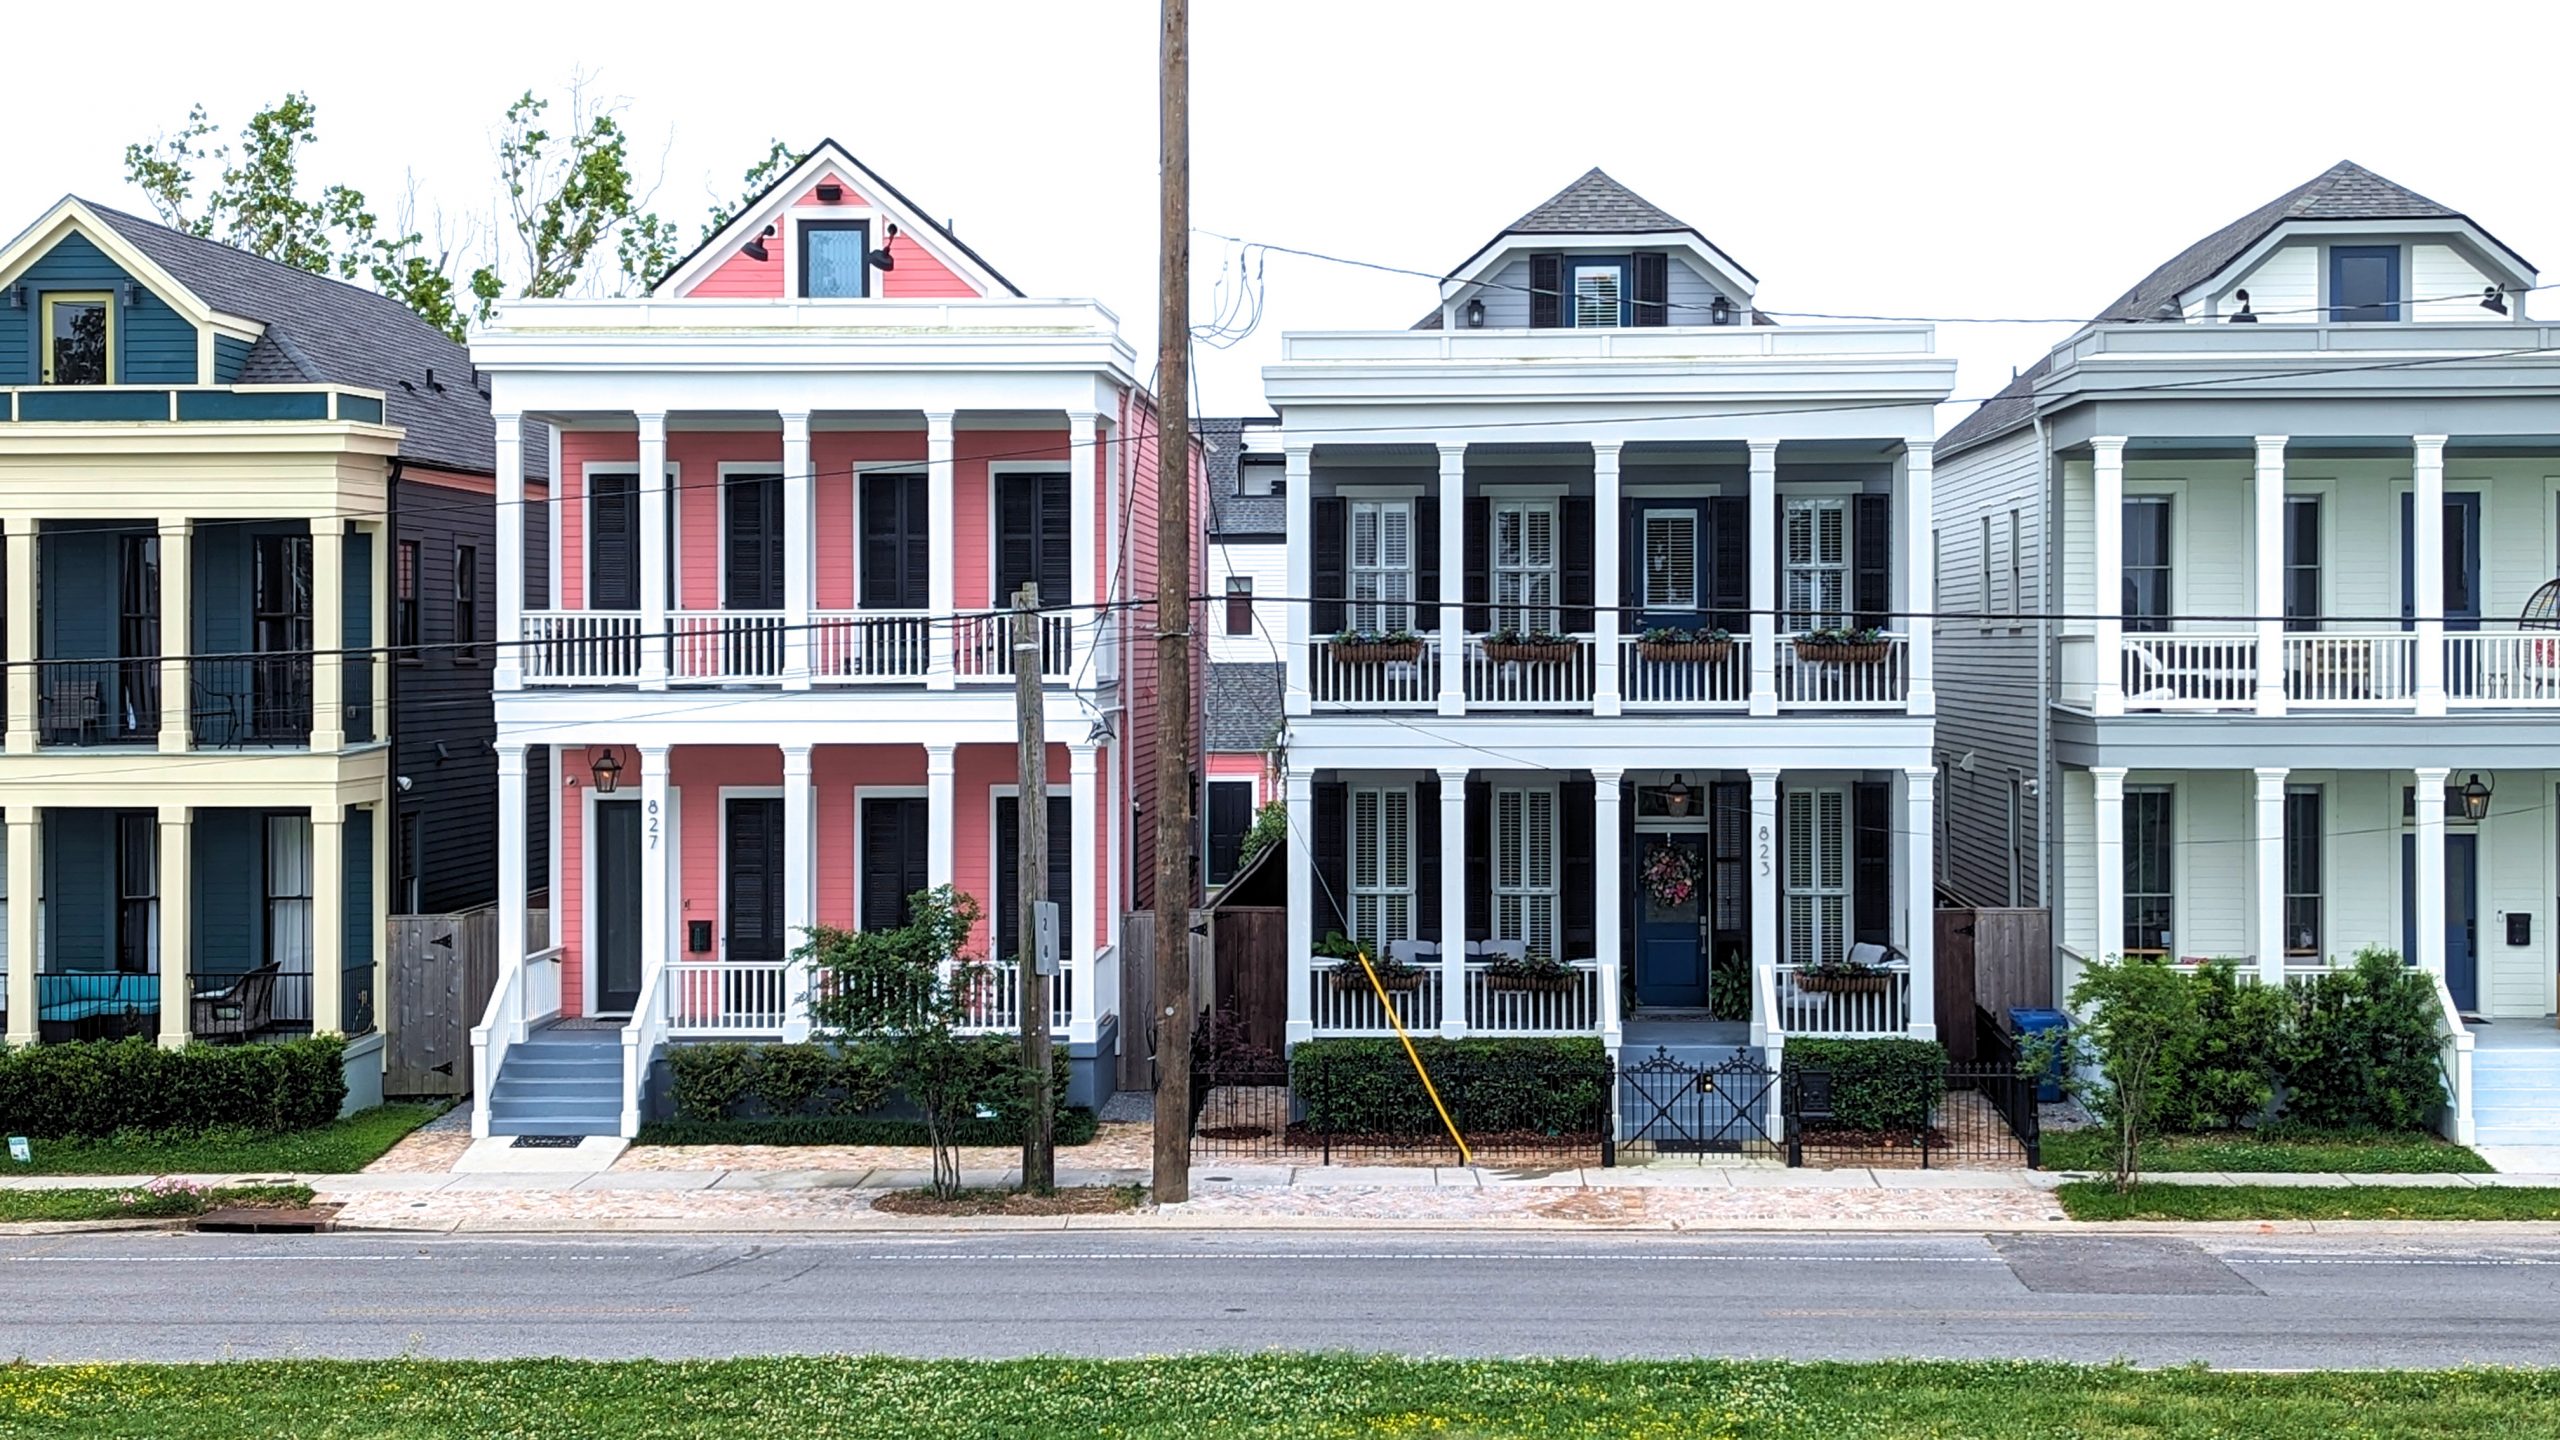 New Orleans architecture, gorgeous homes